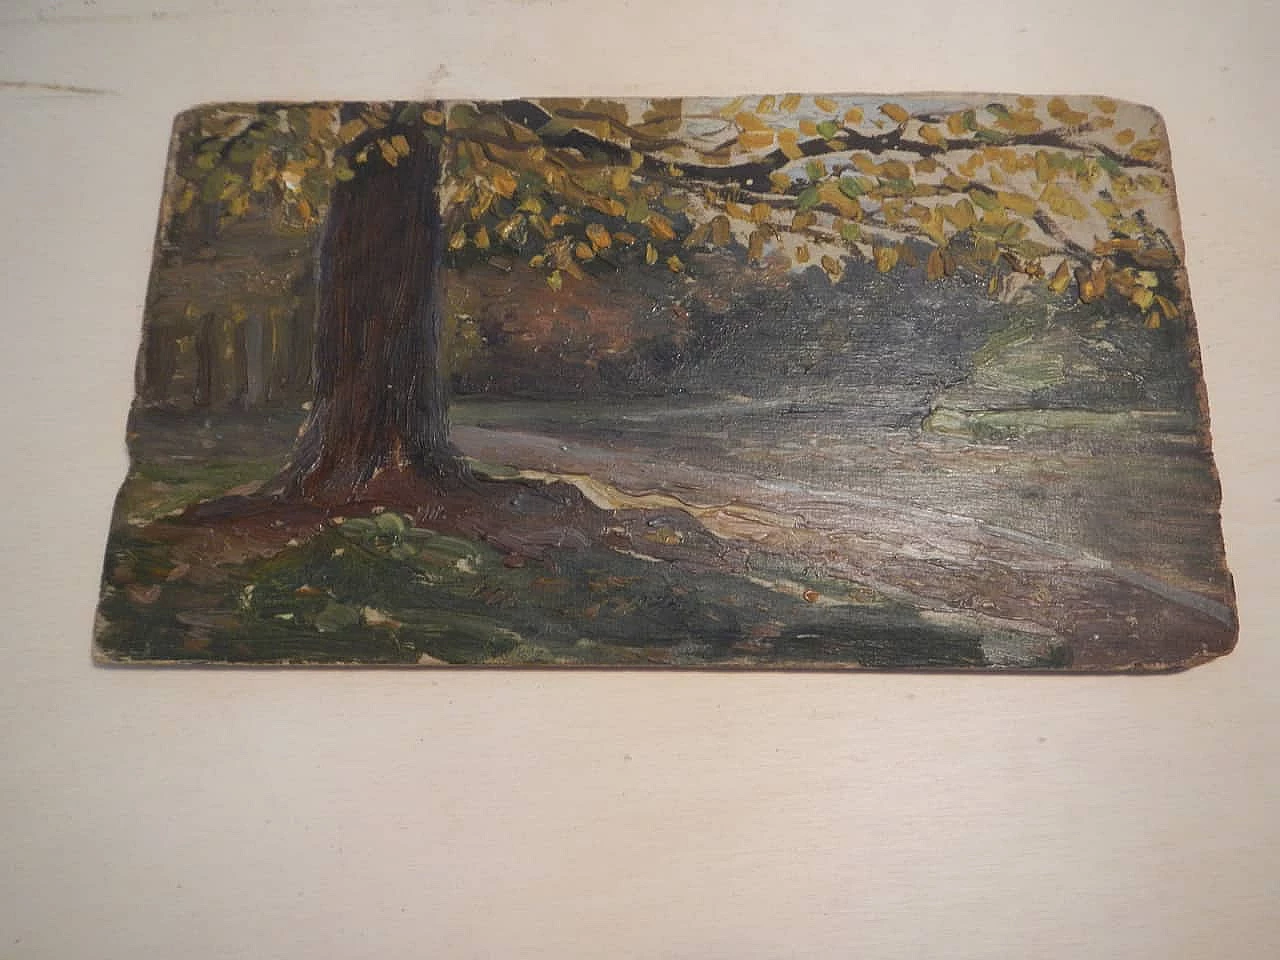 Des Champs, tree trunk, painting on wood, early 20th century 8